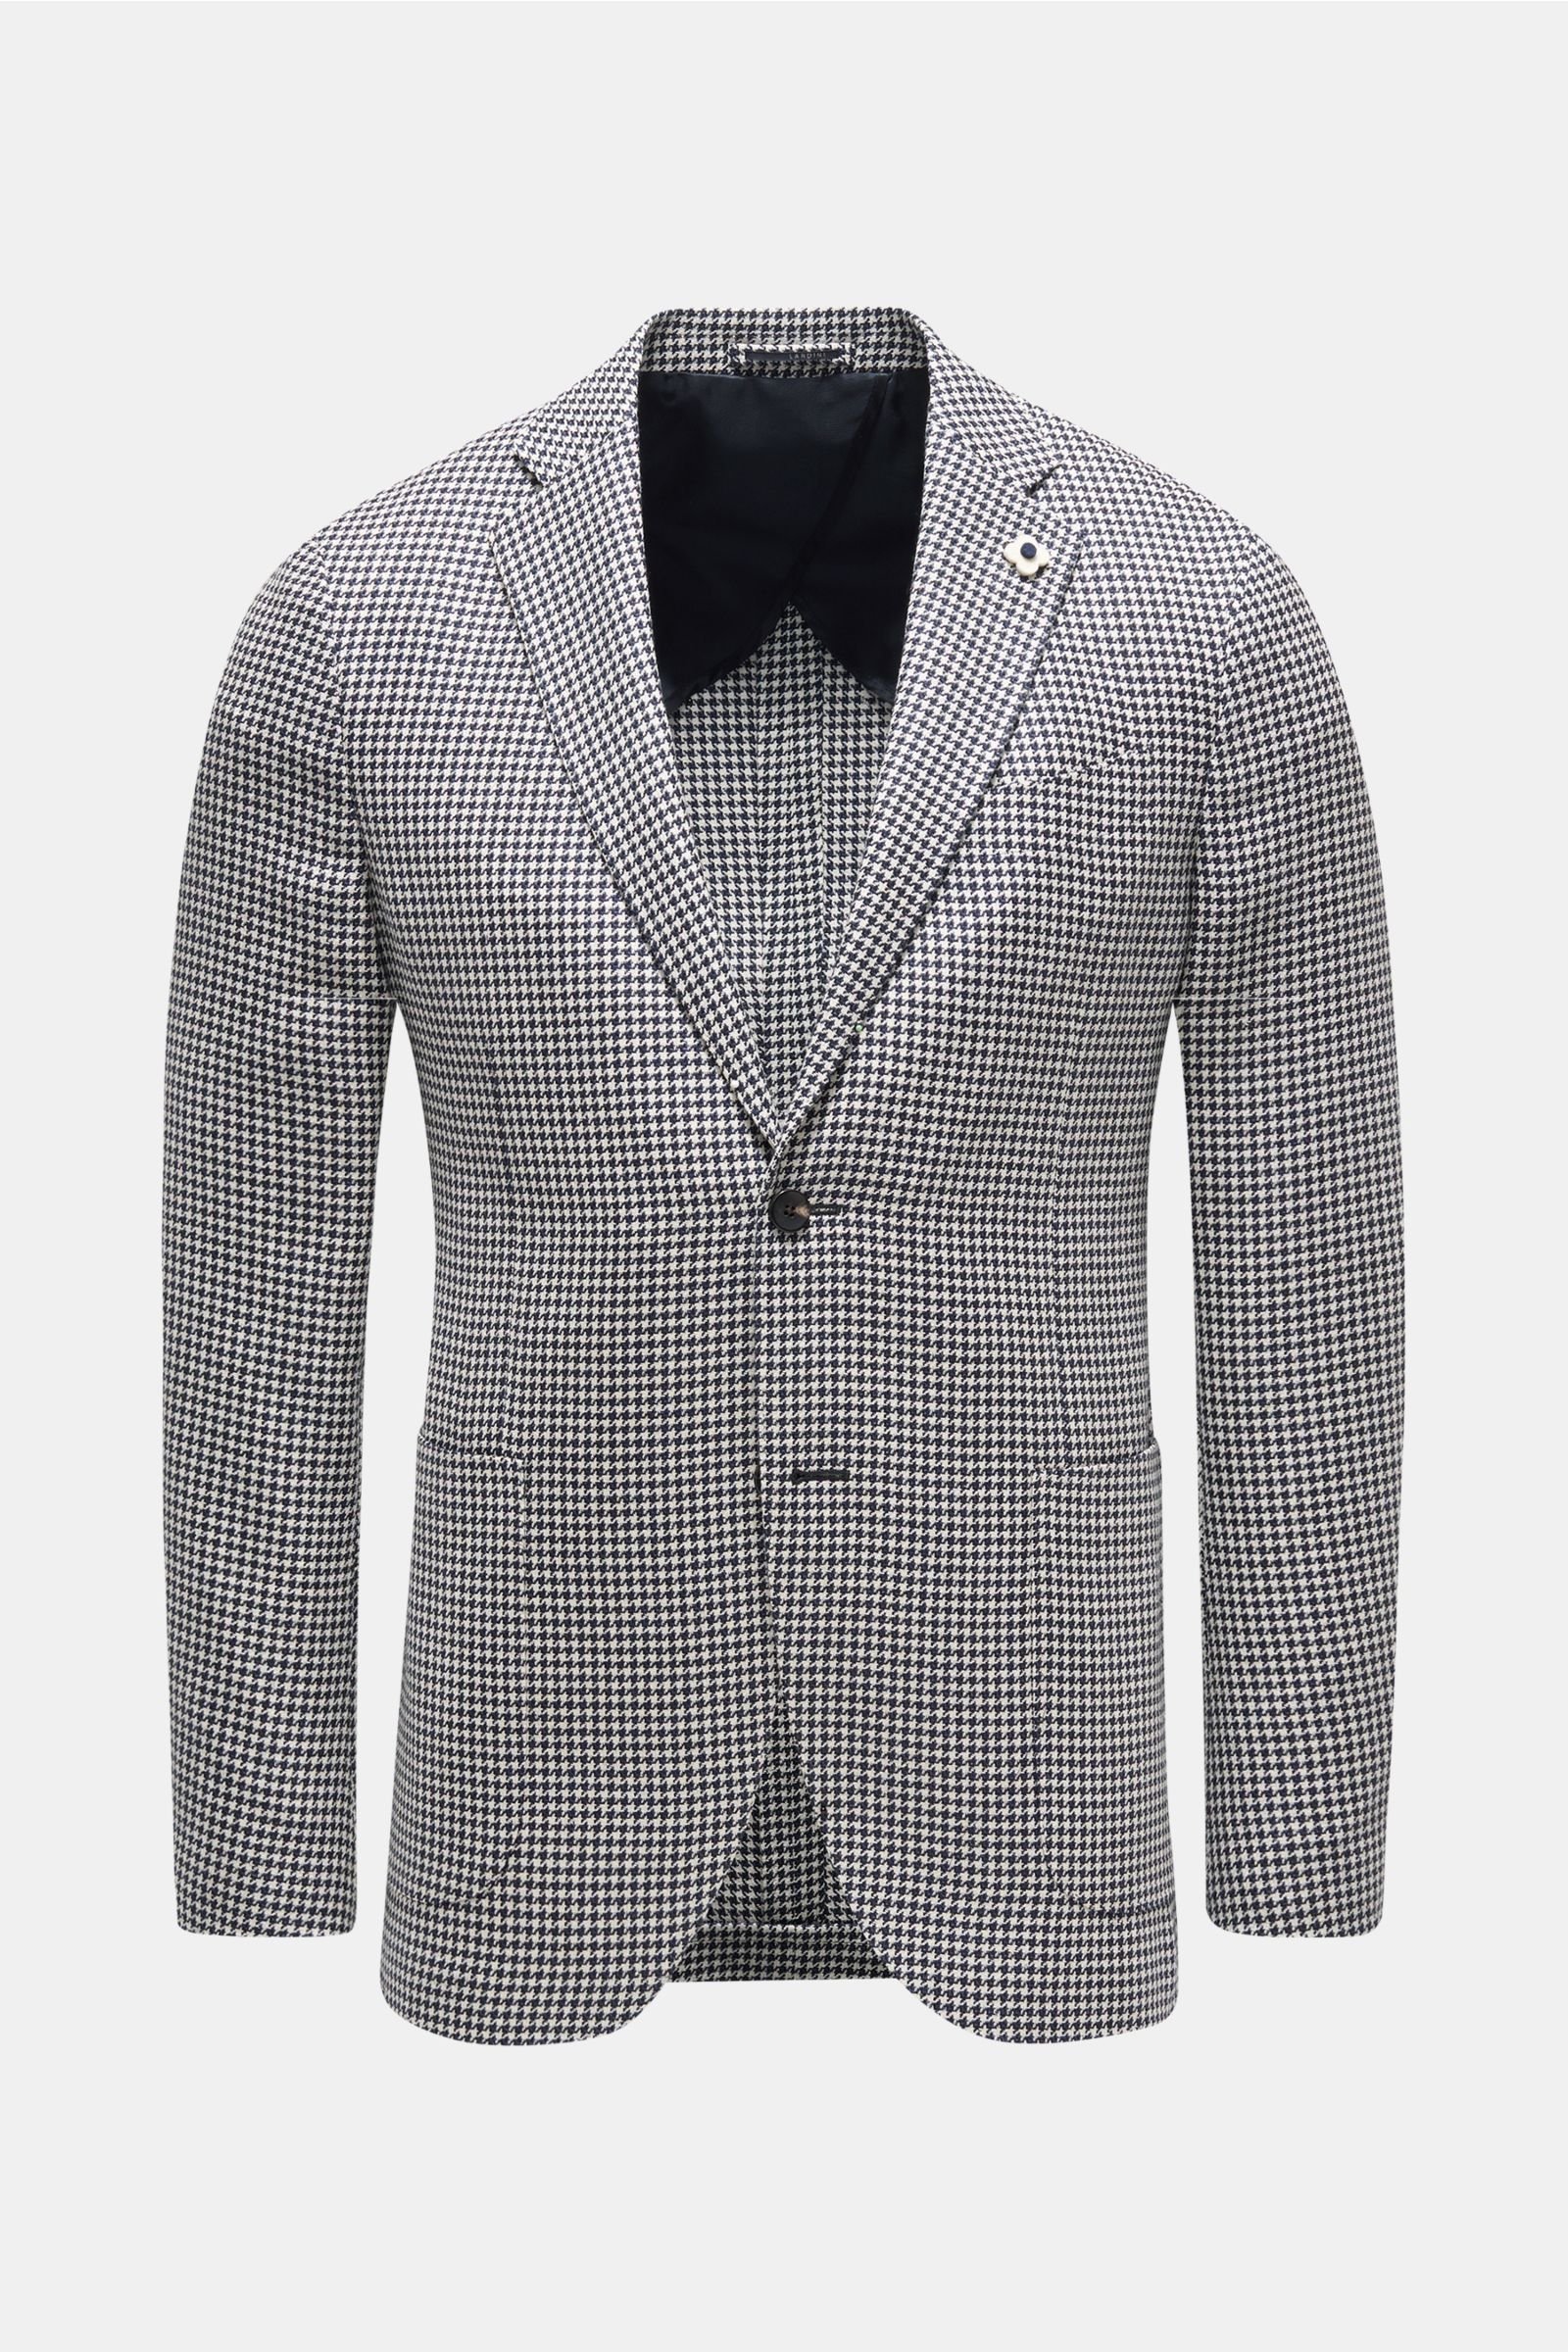 Smart-casual jacket navy/off-white checked